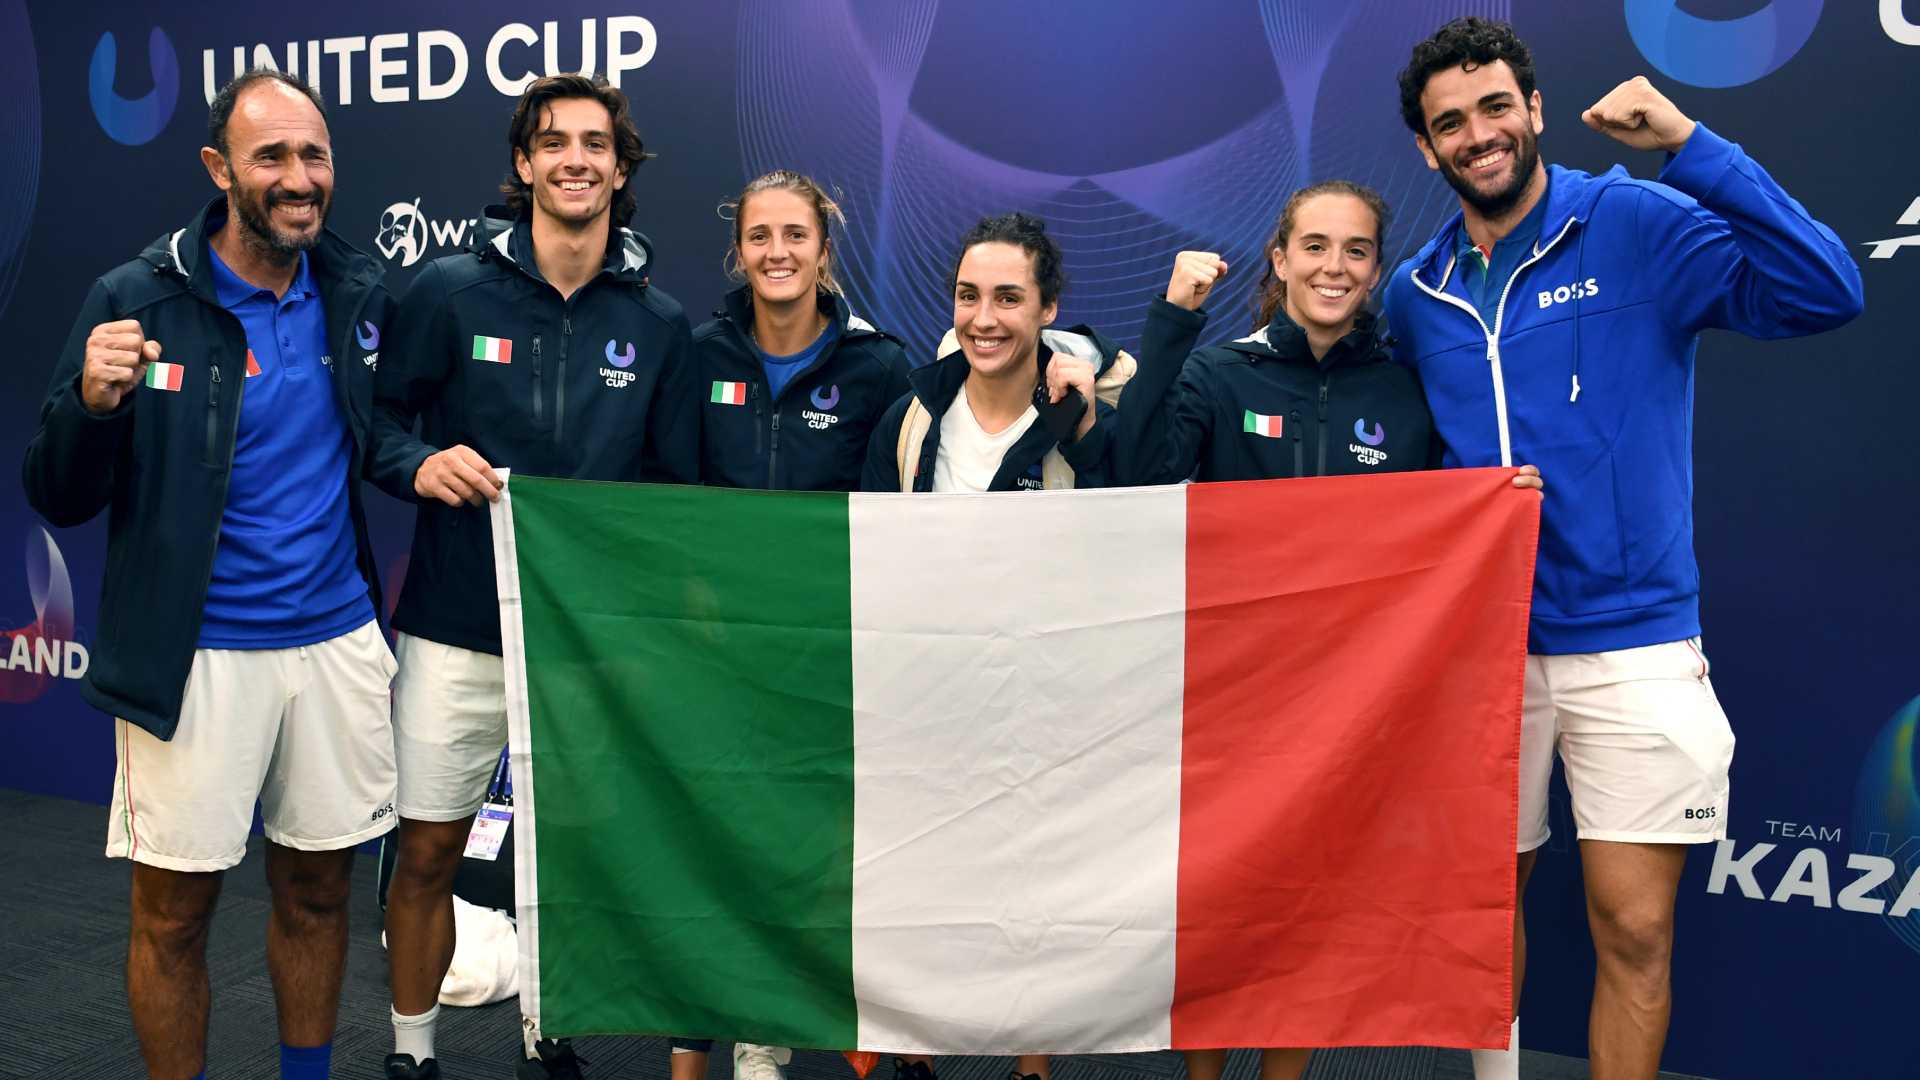 Team Italy advances to the United Cup semi-finals with a 10-5 match record across three ties.